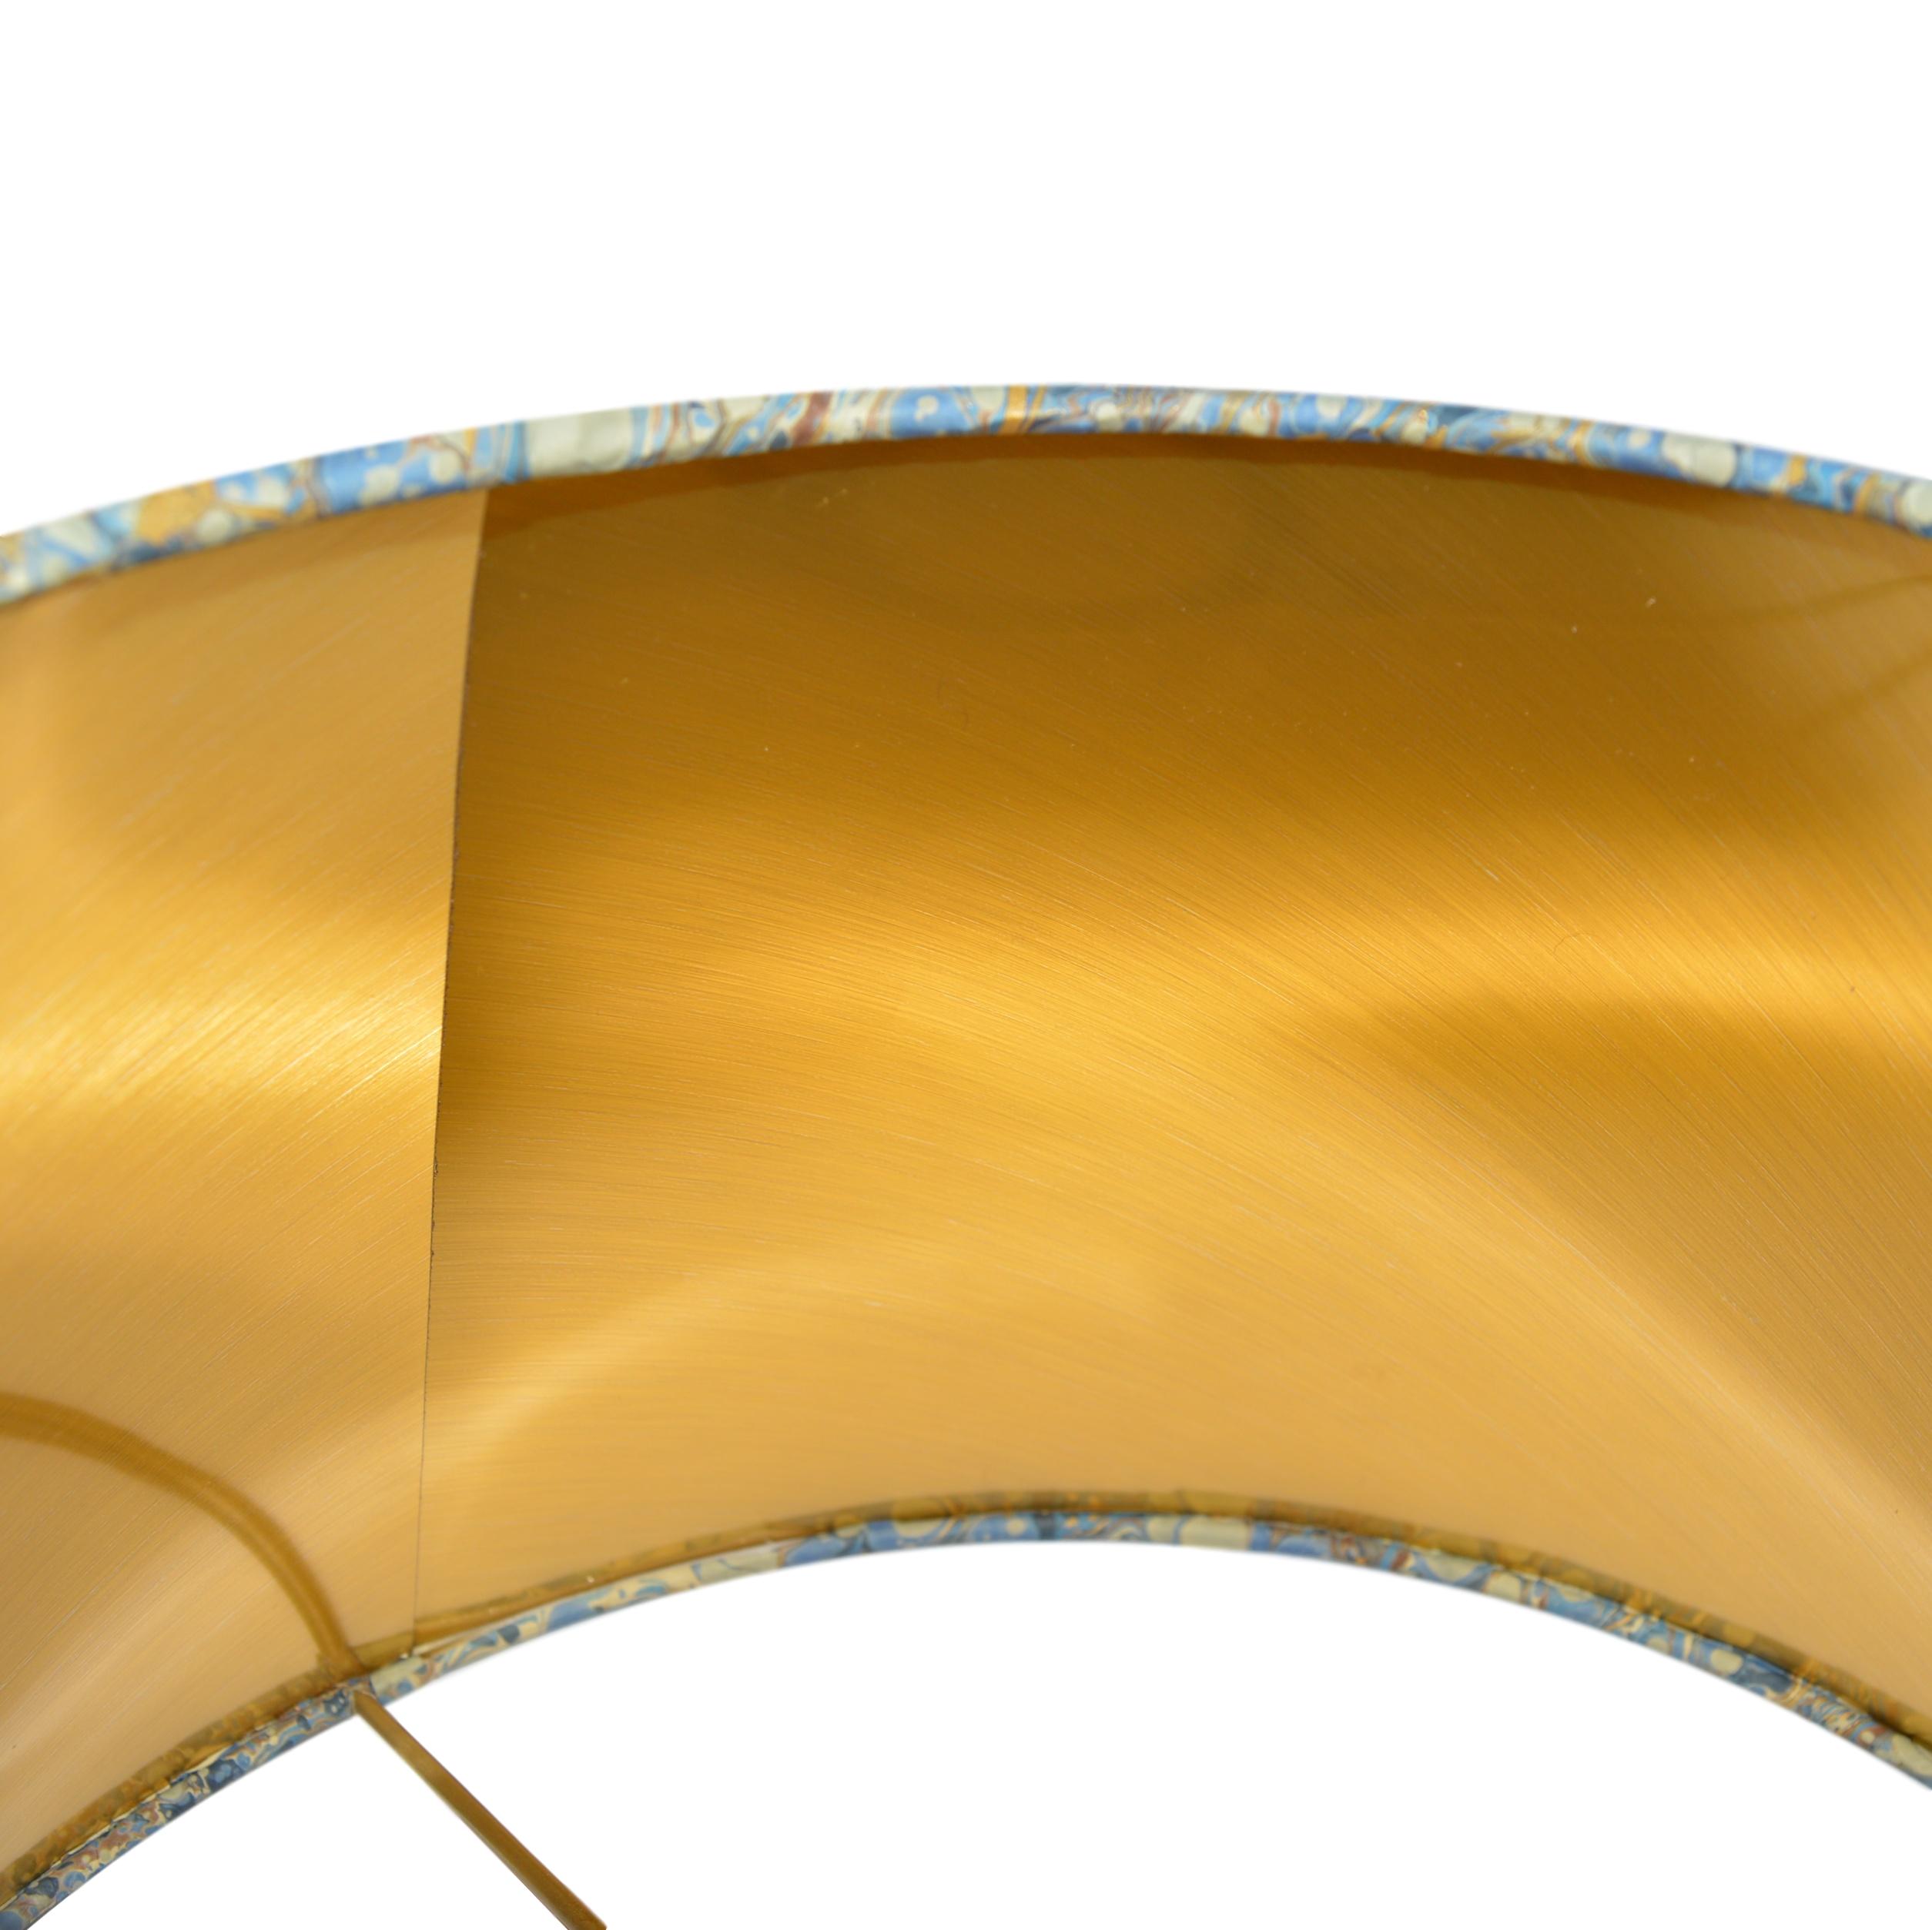 Munro and Kerr blue swirl marbled paper for a handmade tapered drum lampshade with gold lining